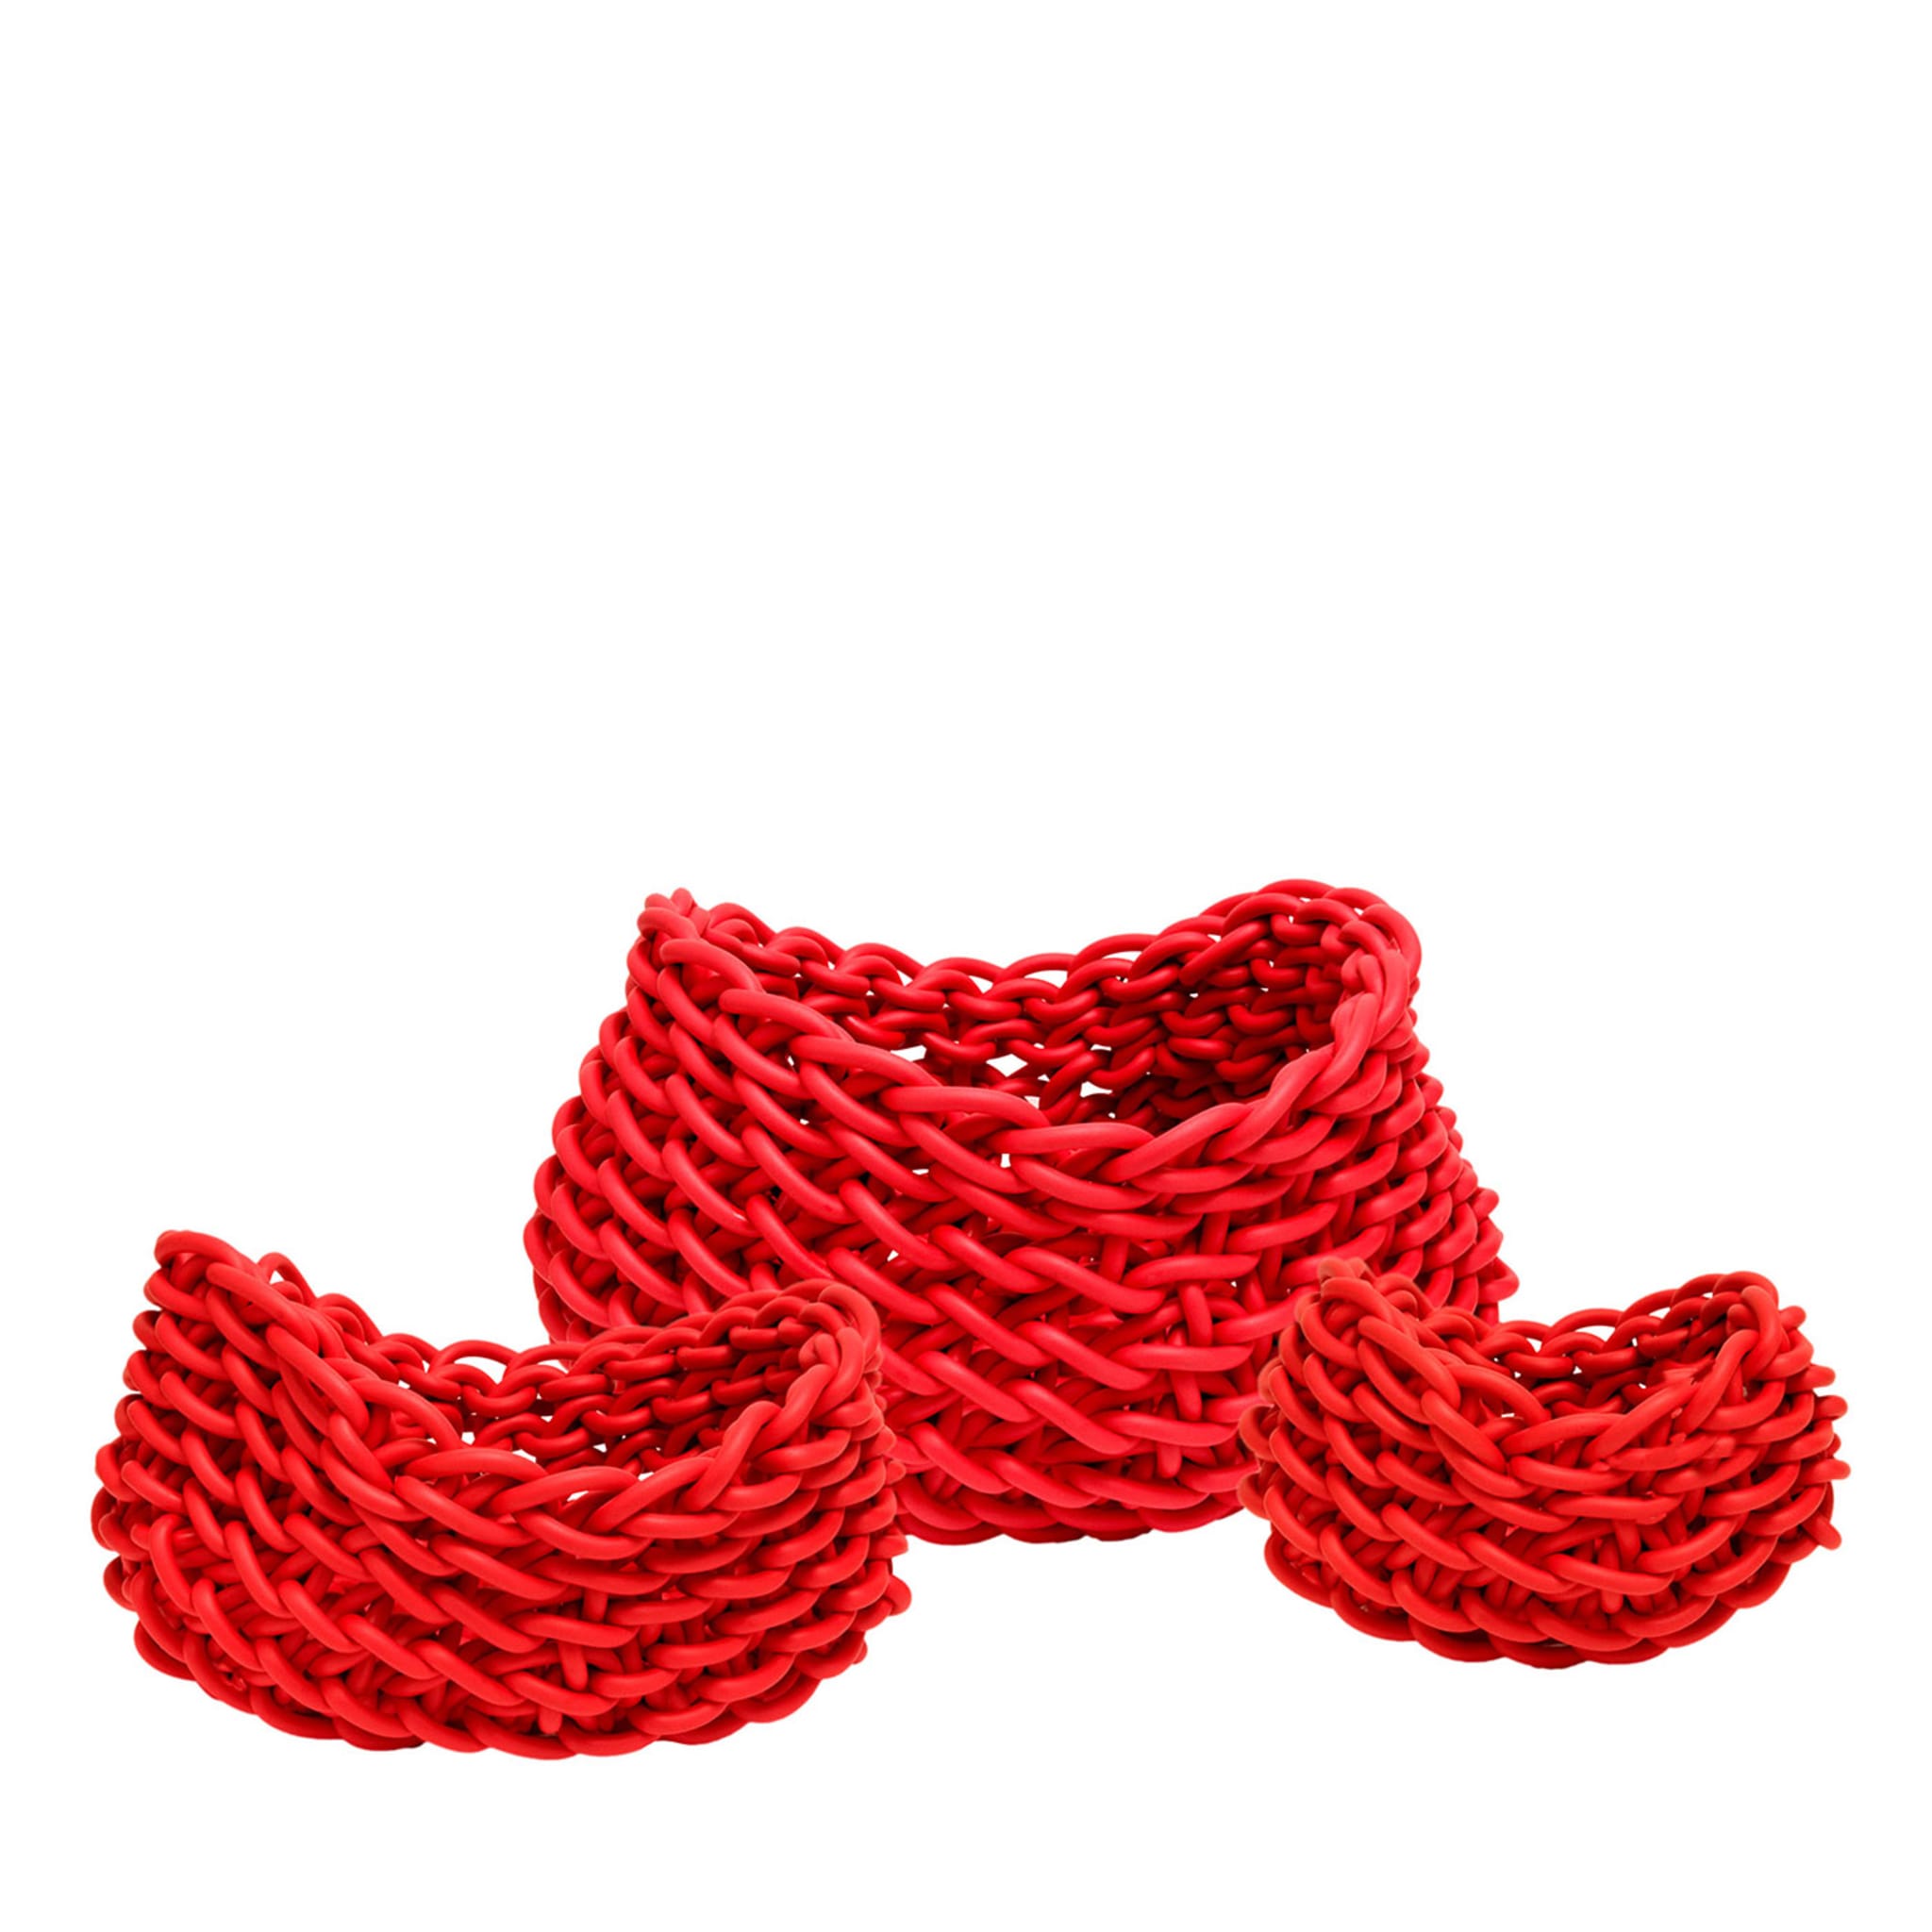 Barca Set of 3 Red Baskets - Main view